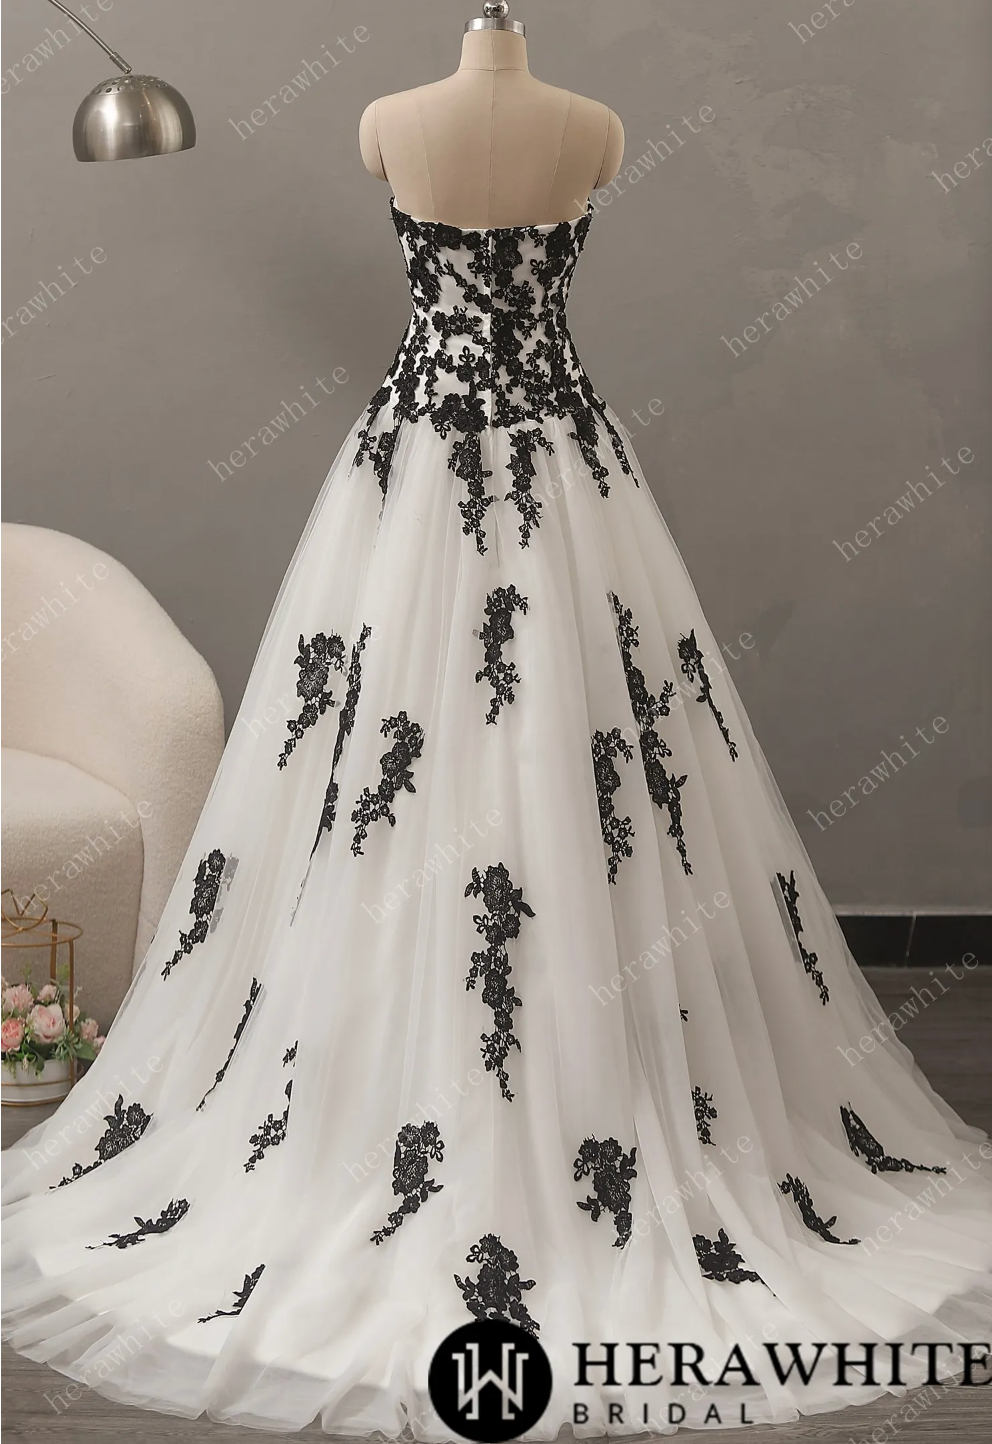 Princess Ball Gown with Strapless Sweetheart Neckline and Tulle Skirt